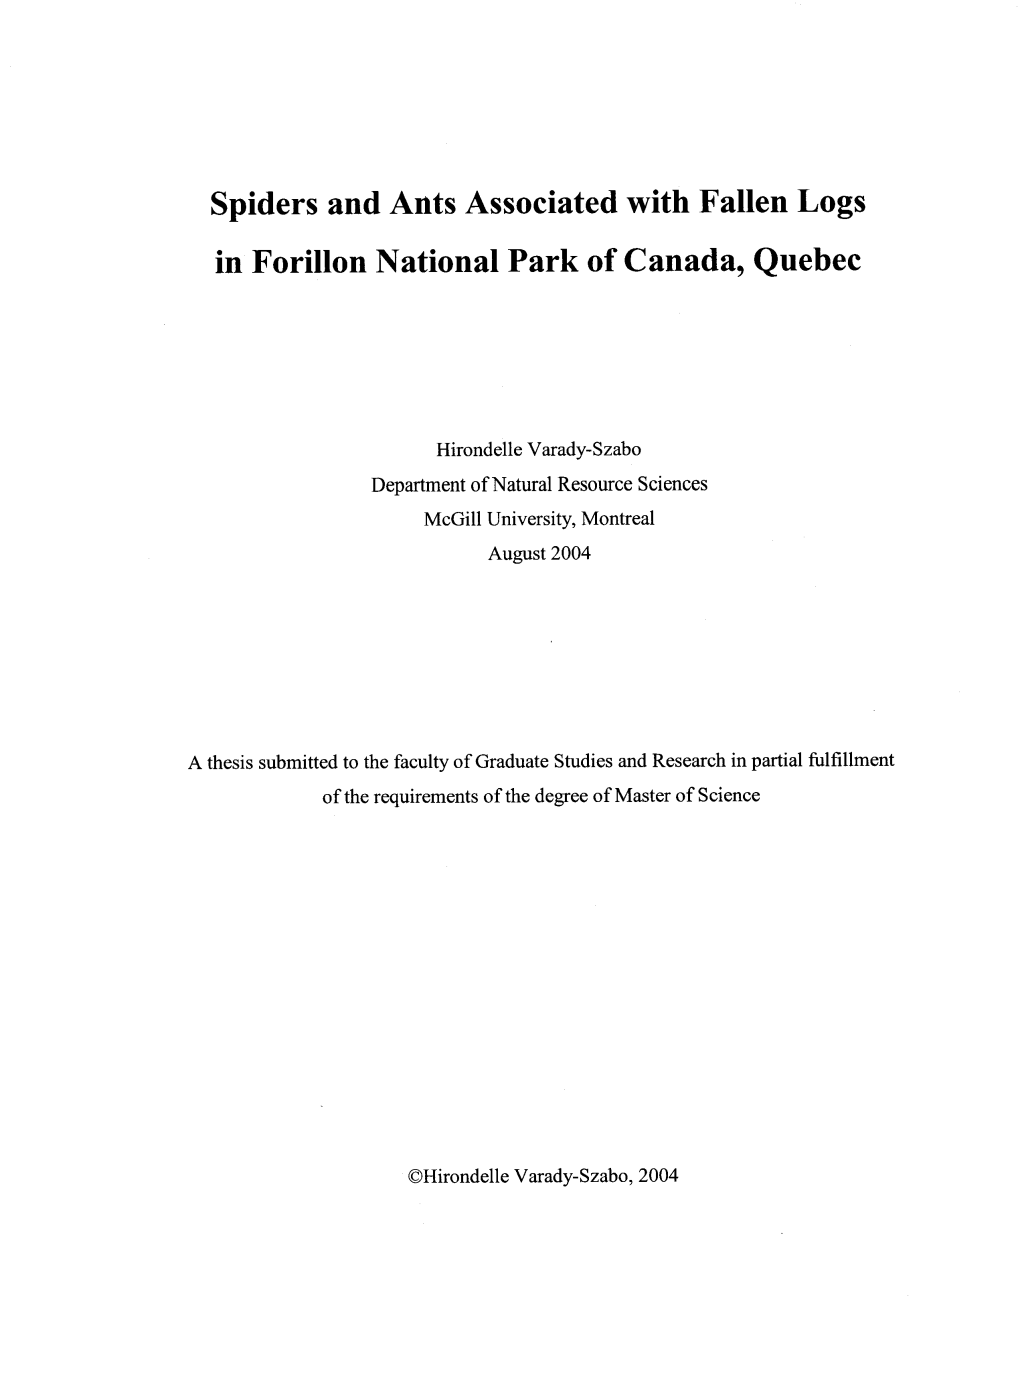 Spiders and Ants Associated with Fallen Logs in Forillon National Park of Canada, Quebec